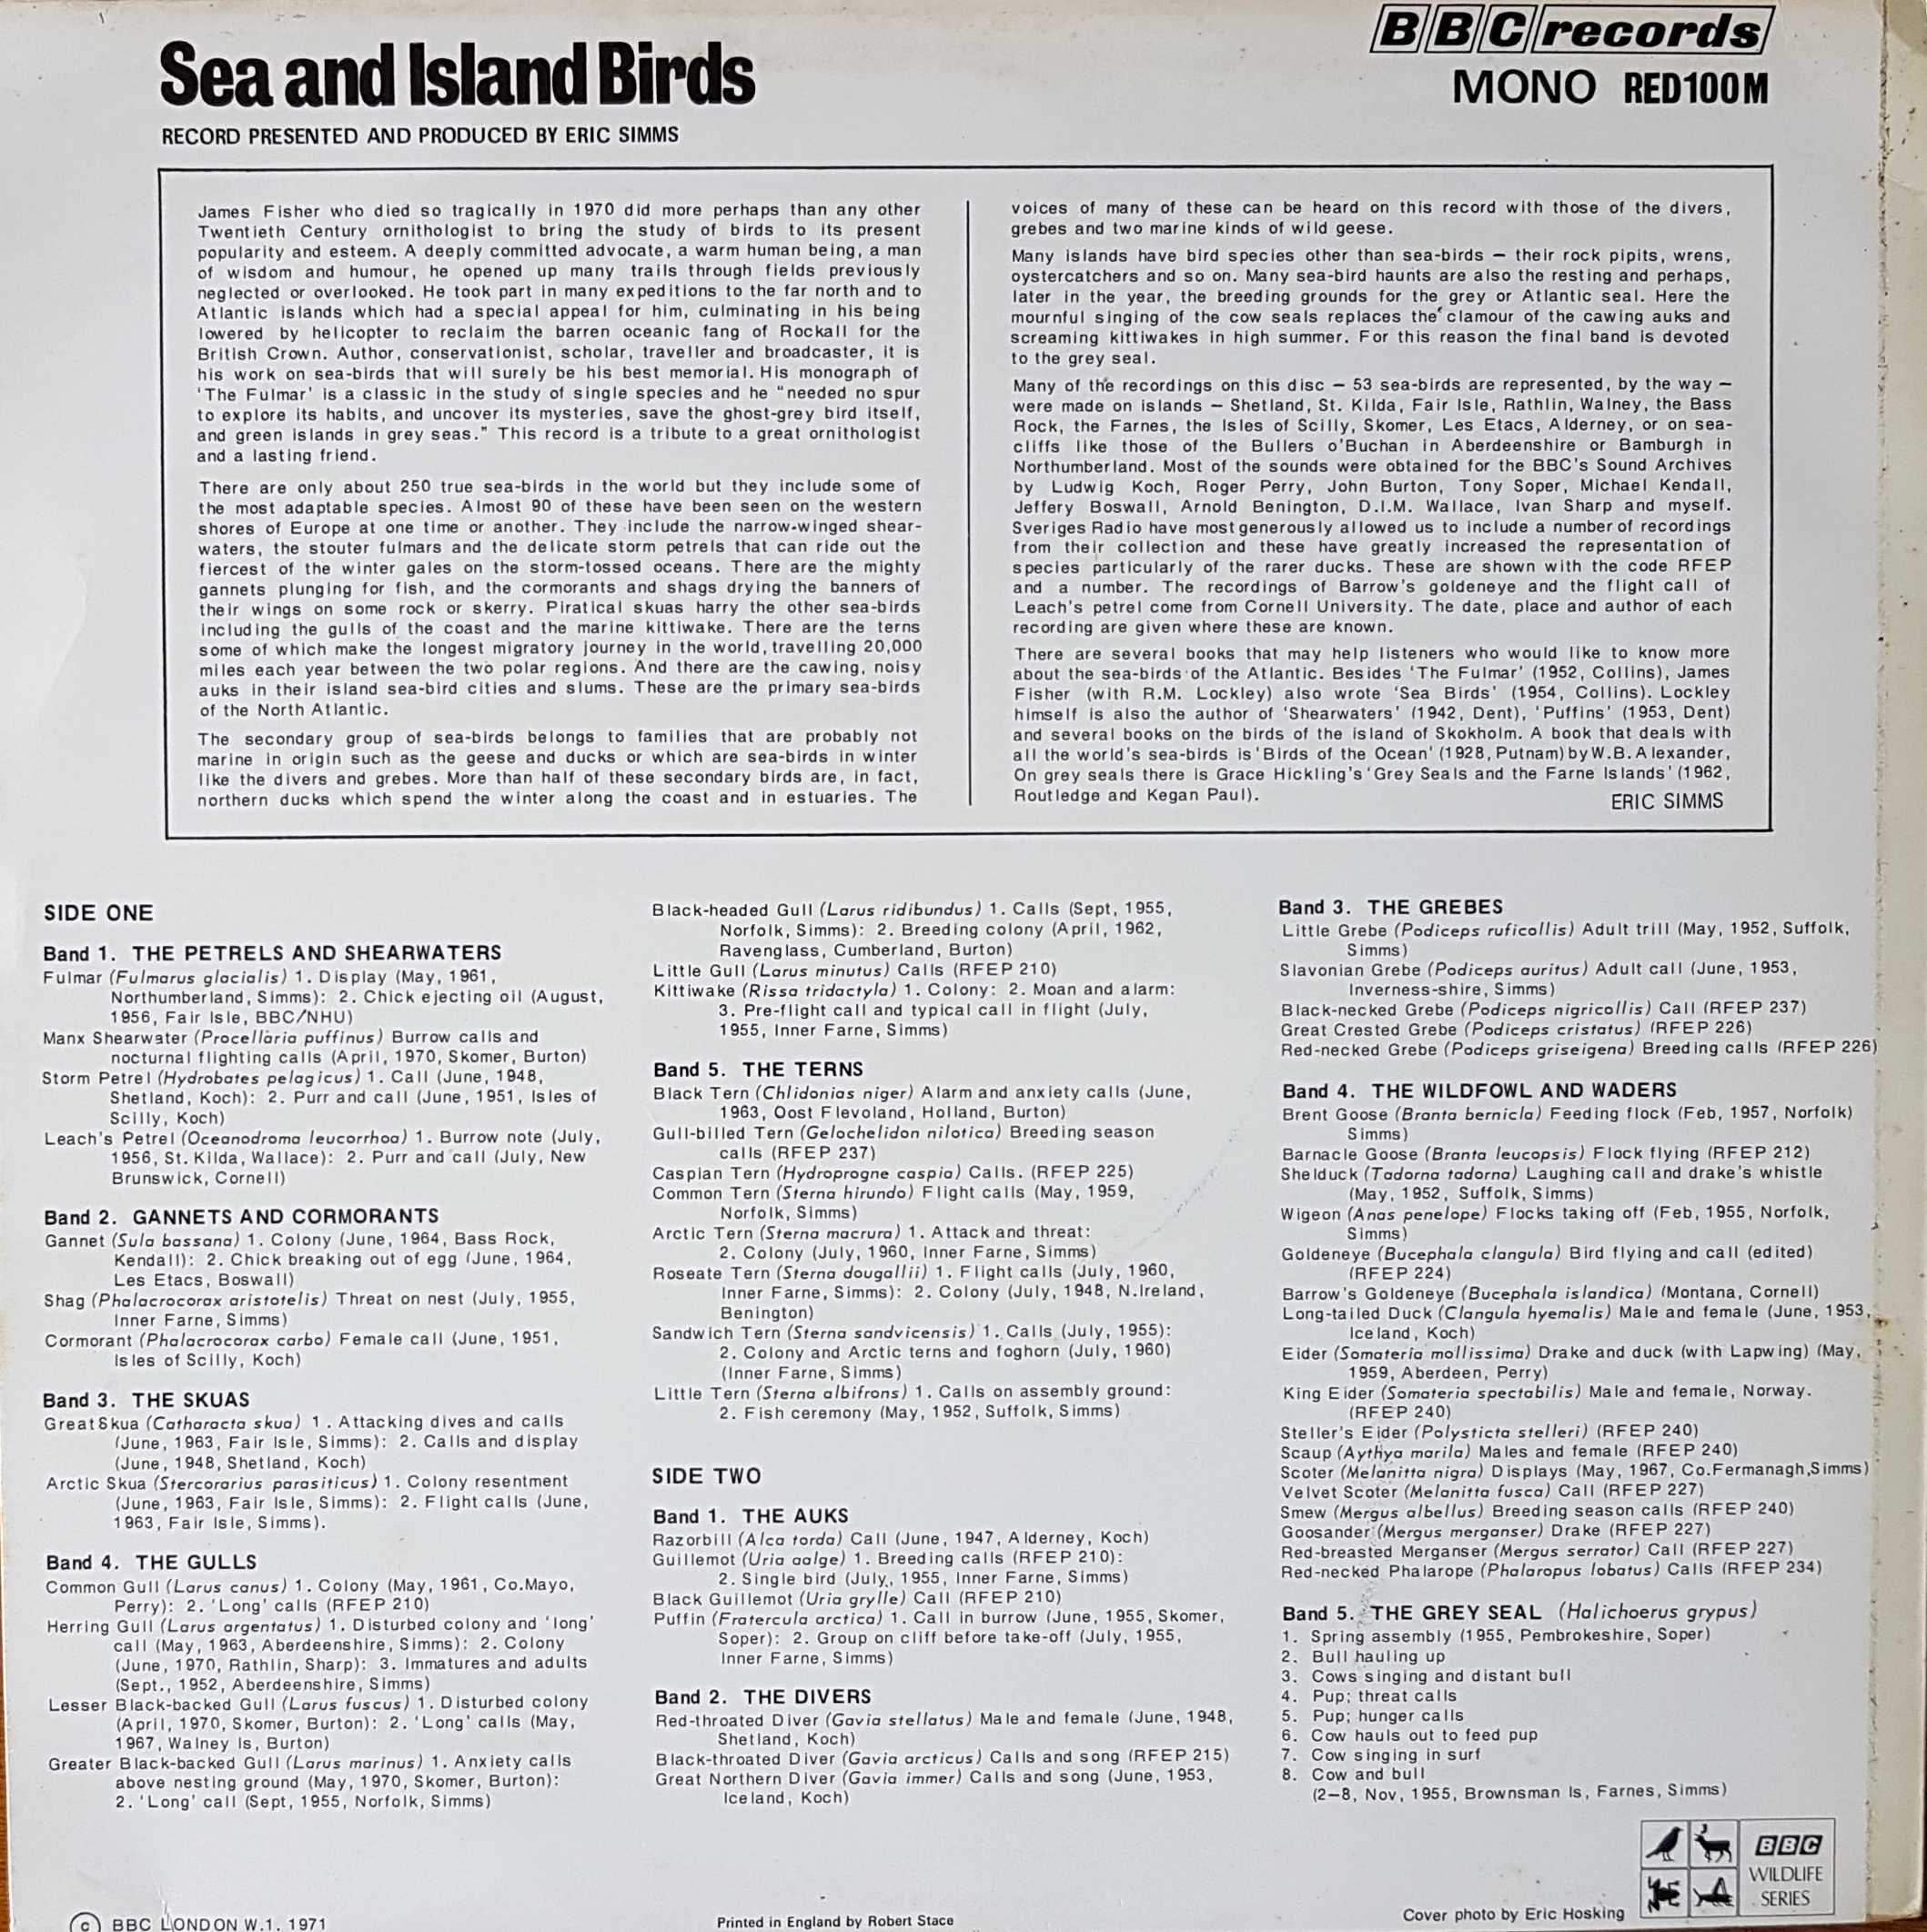 Picture of RED 100 Sea and island birds by artist Various from the BBC records and Tapes library